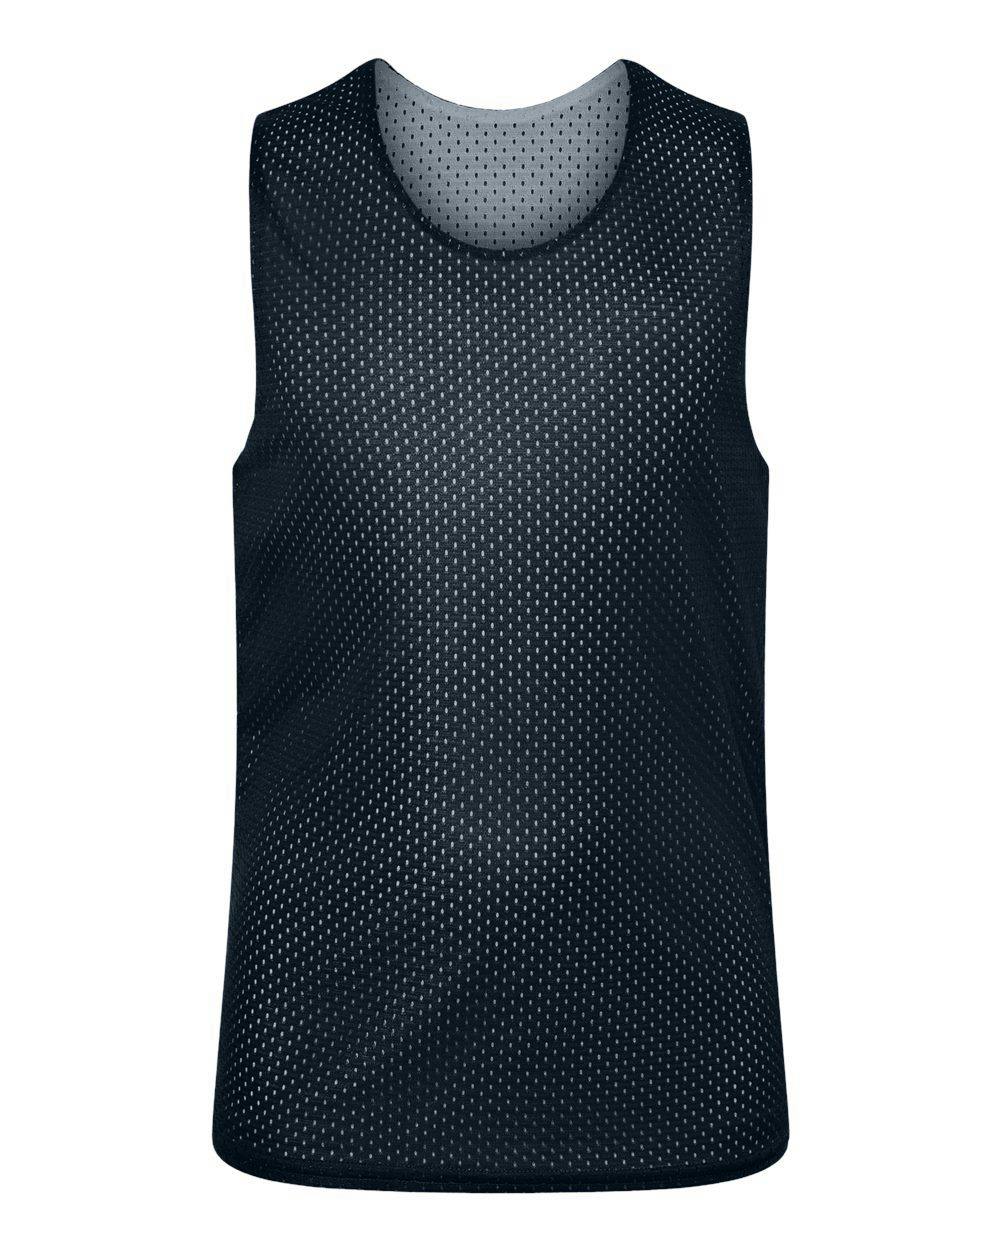 Image for Youth Reversible Mesh Tank - 5228